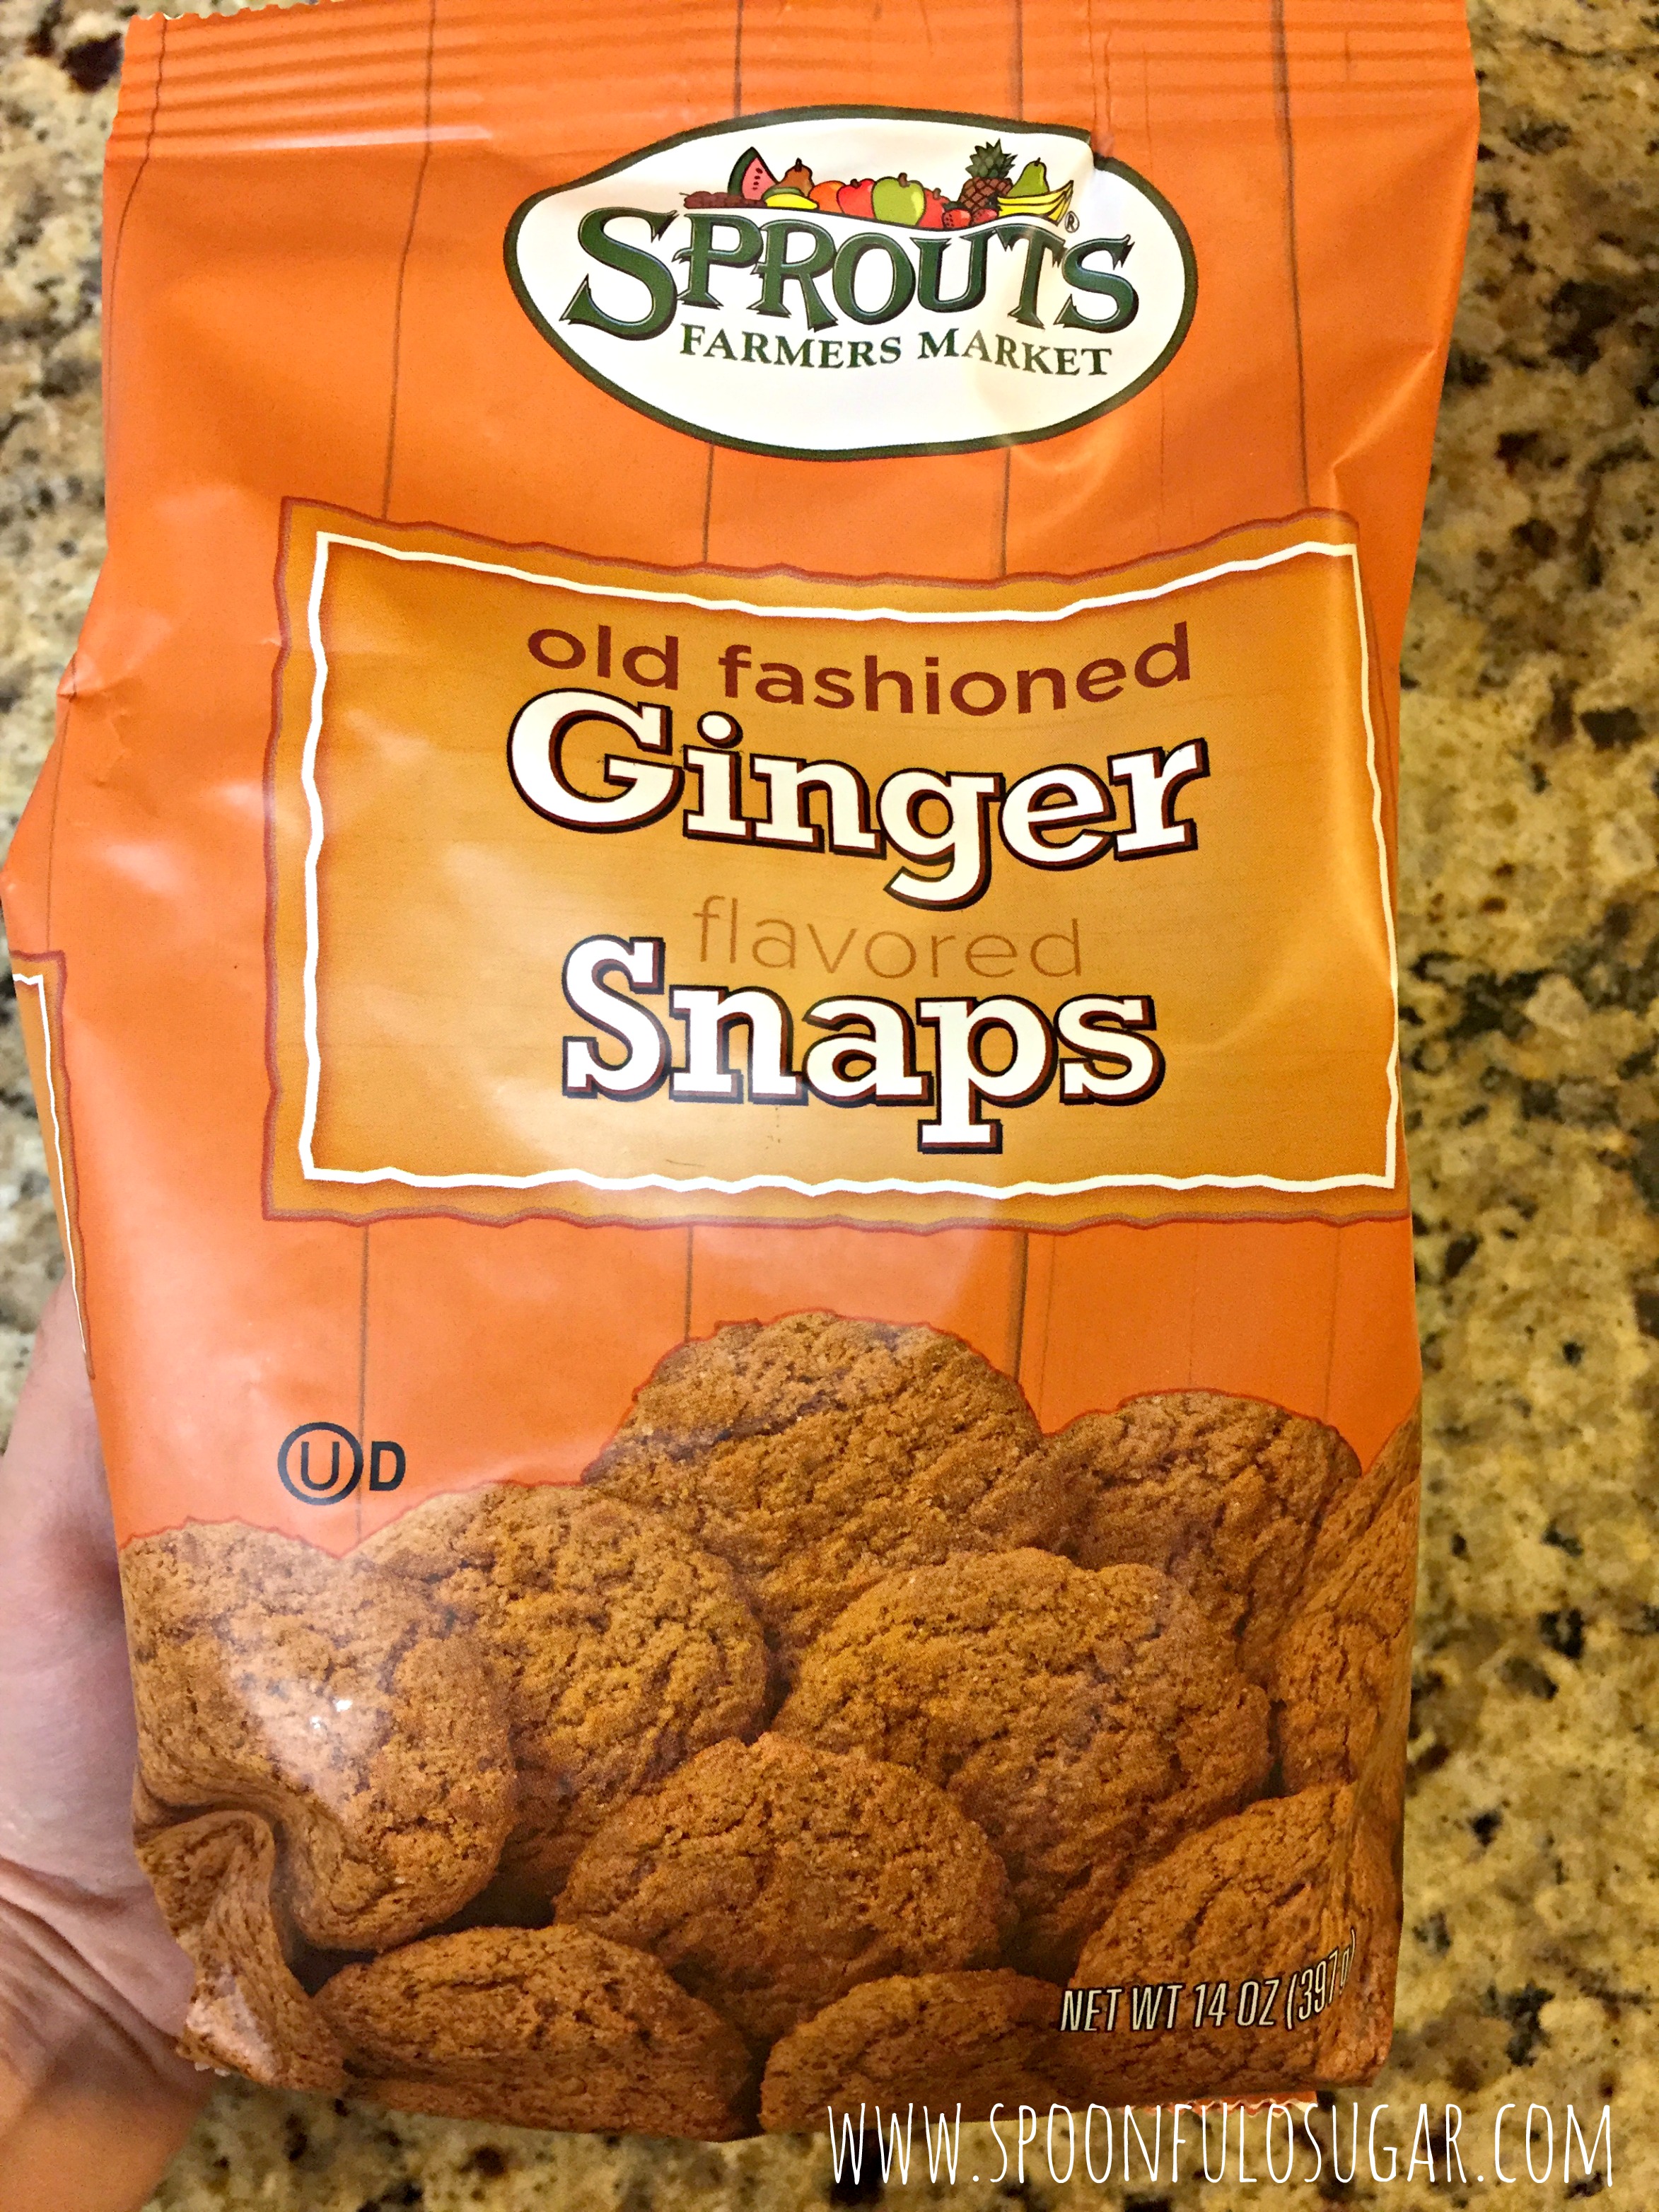 Ginger snaps are both gingery and snappy.